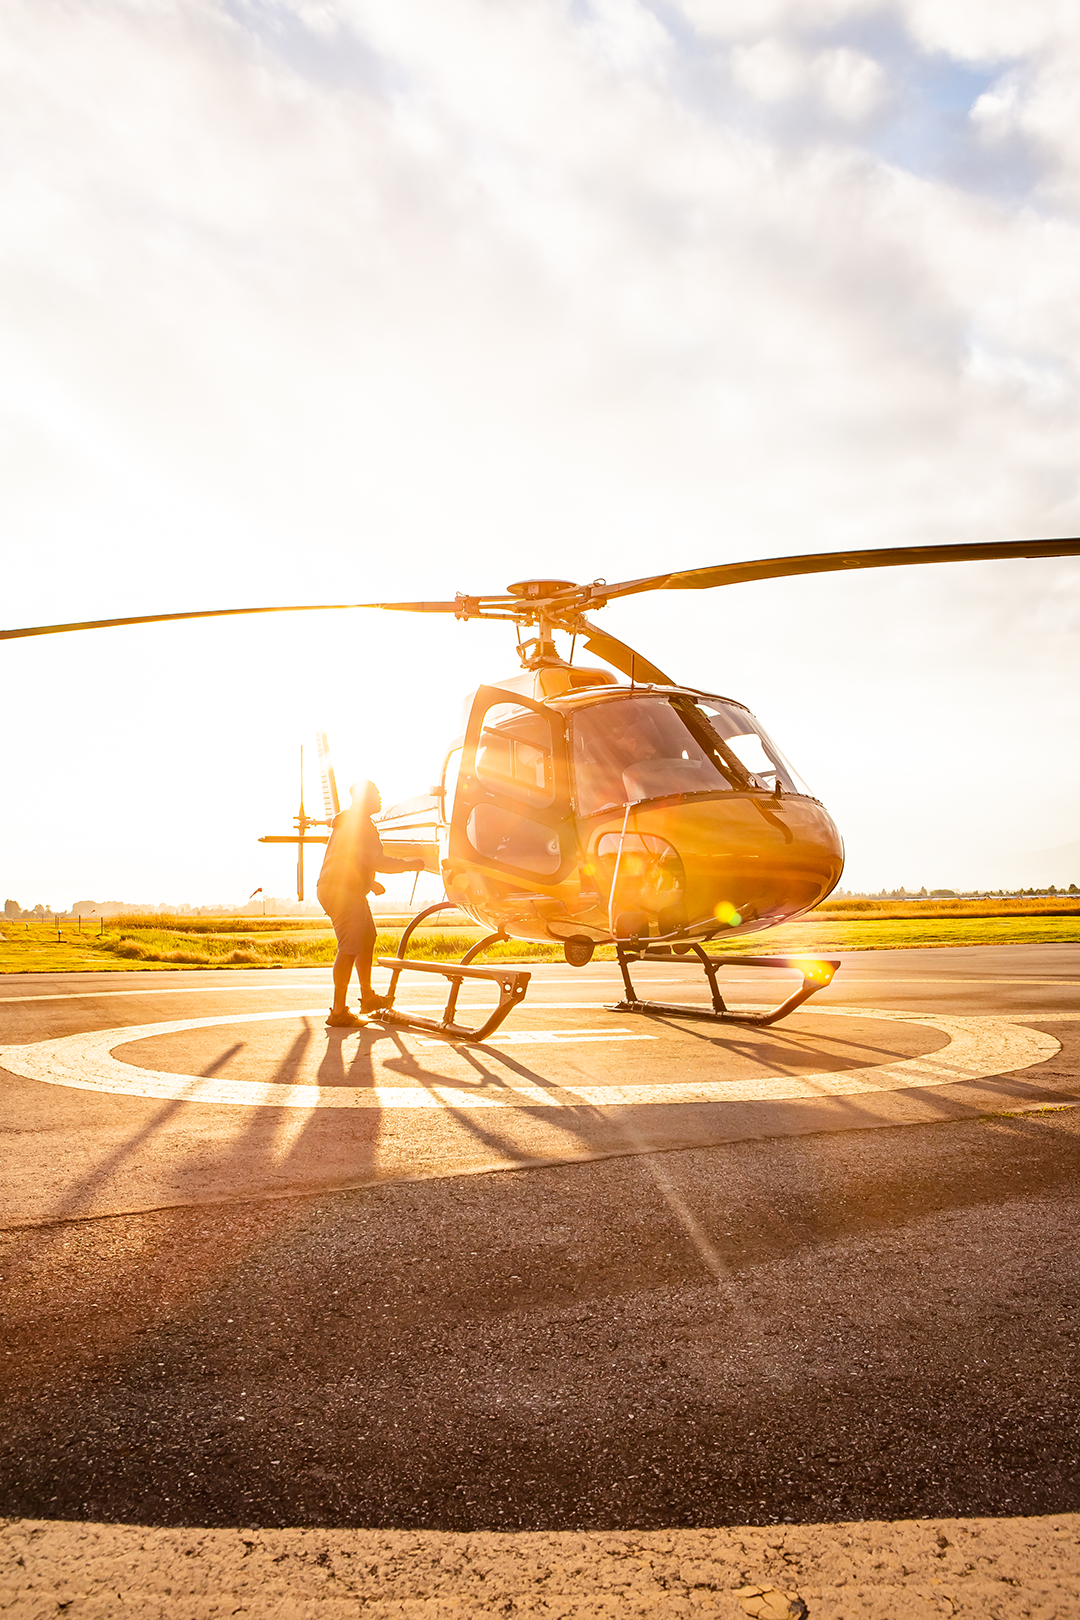 Unveiling the Versatility and Excellence of the AS350 Helicopter